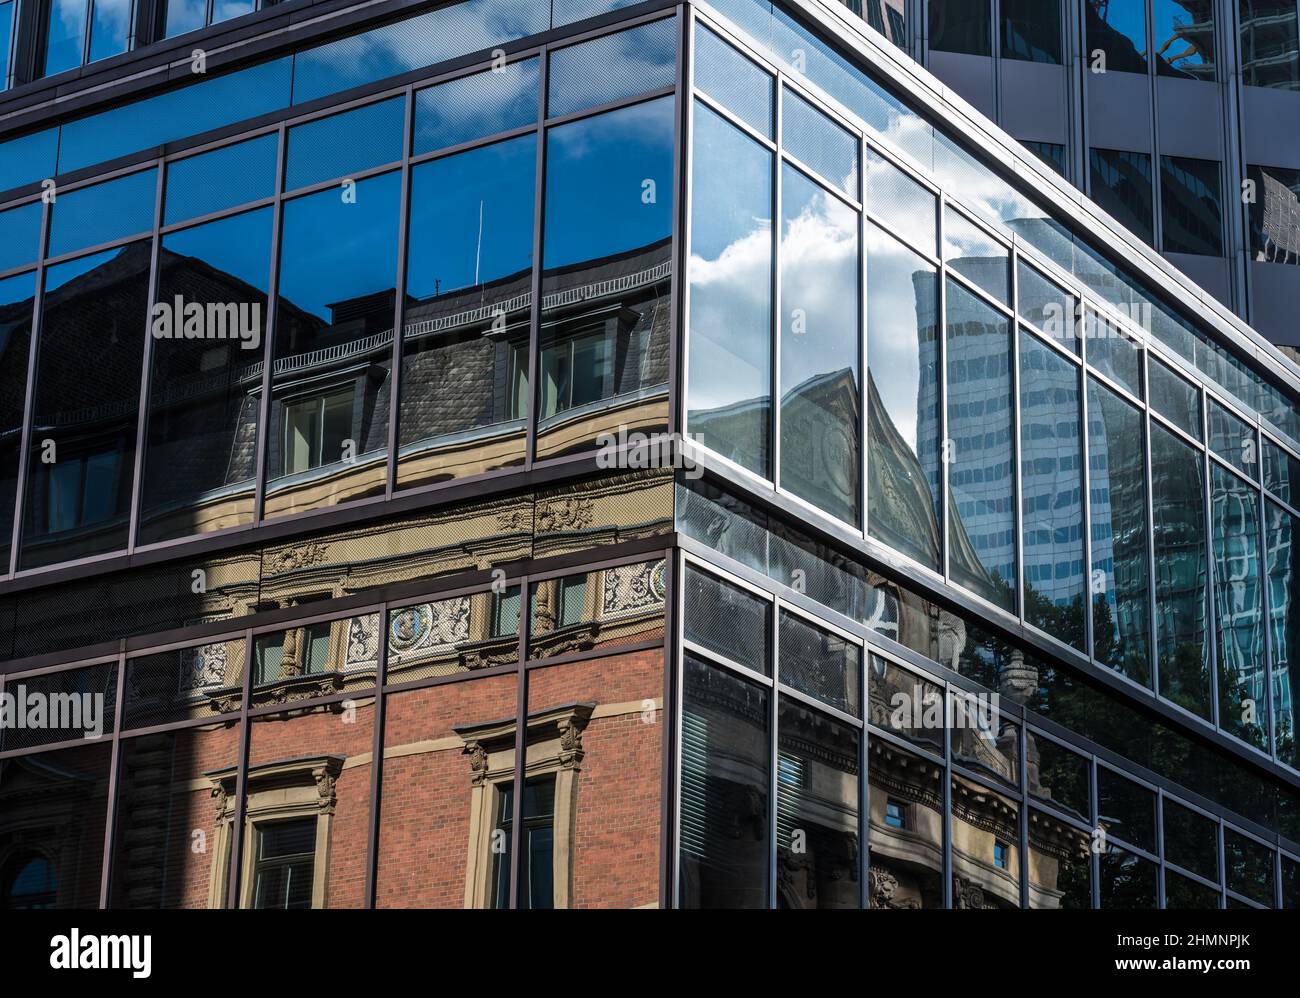 Frankfurt am Main, Hesse - Germany - 08 11 2018: Abstract view on modern office buildings in the financial district Stock Photo